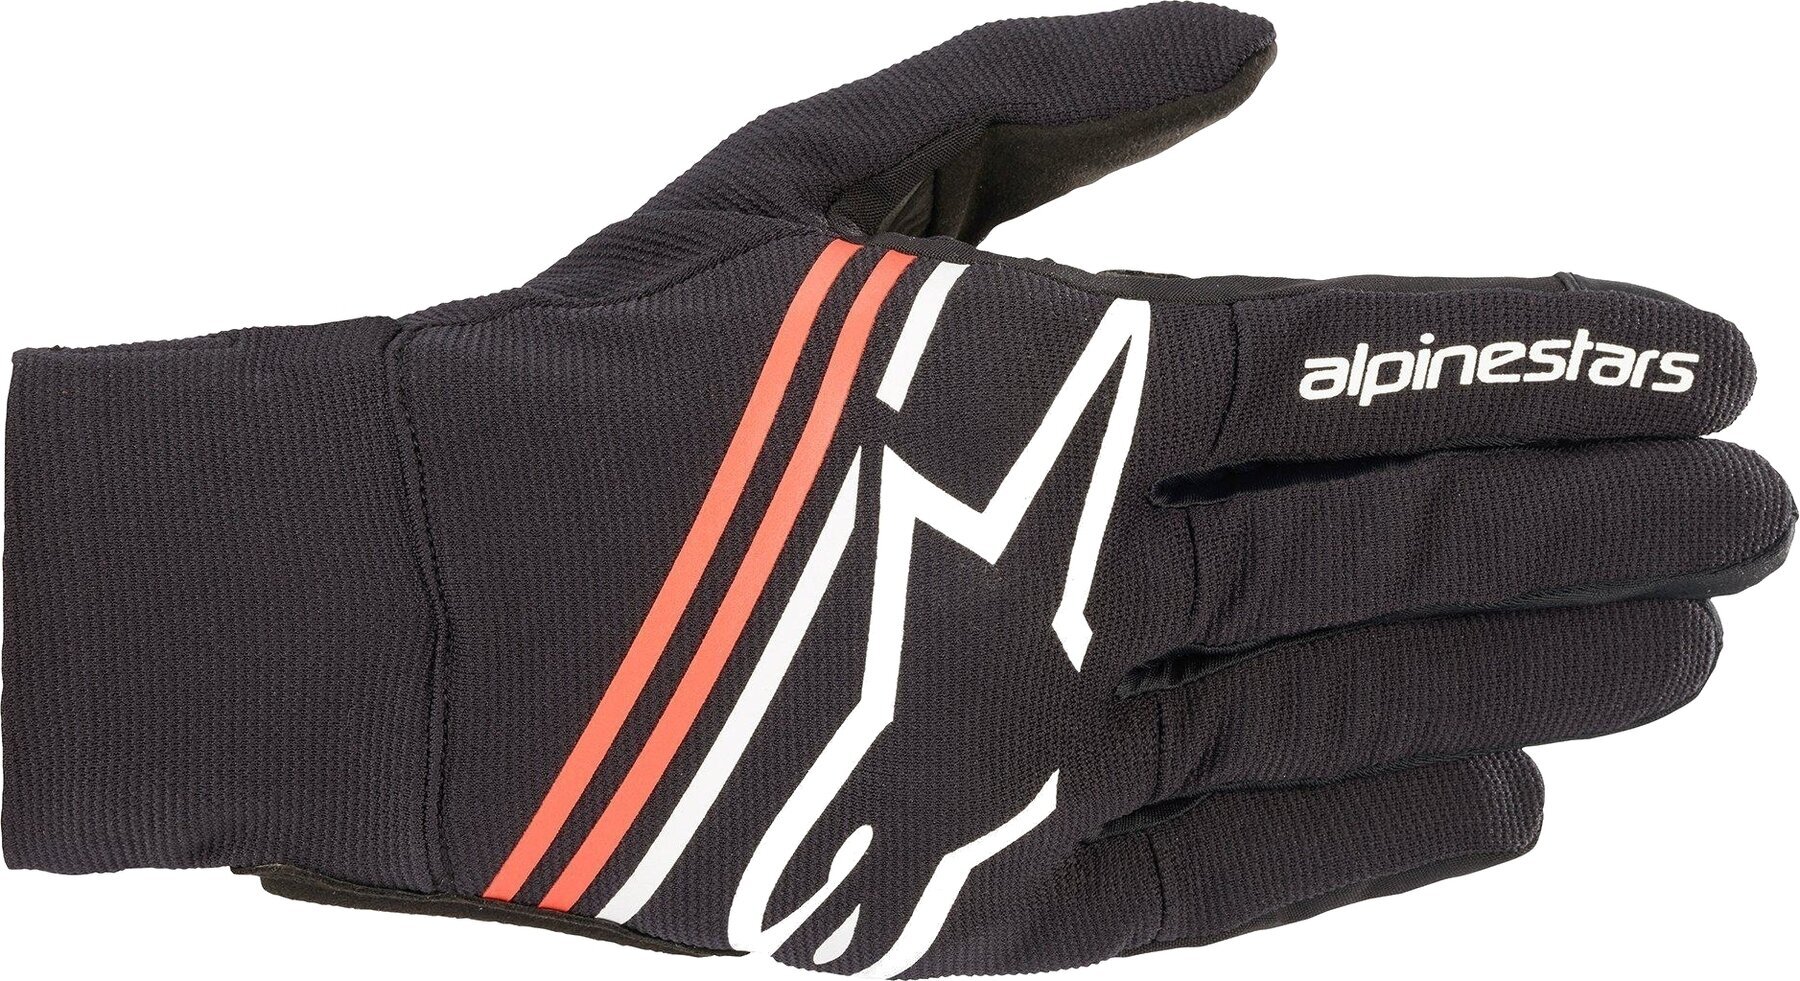 Motorcycle Gloves Alpinestars Reef Gloves Black/White/Red Fluo S Motorcycle Gloves